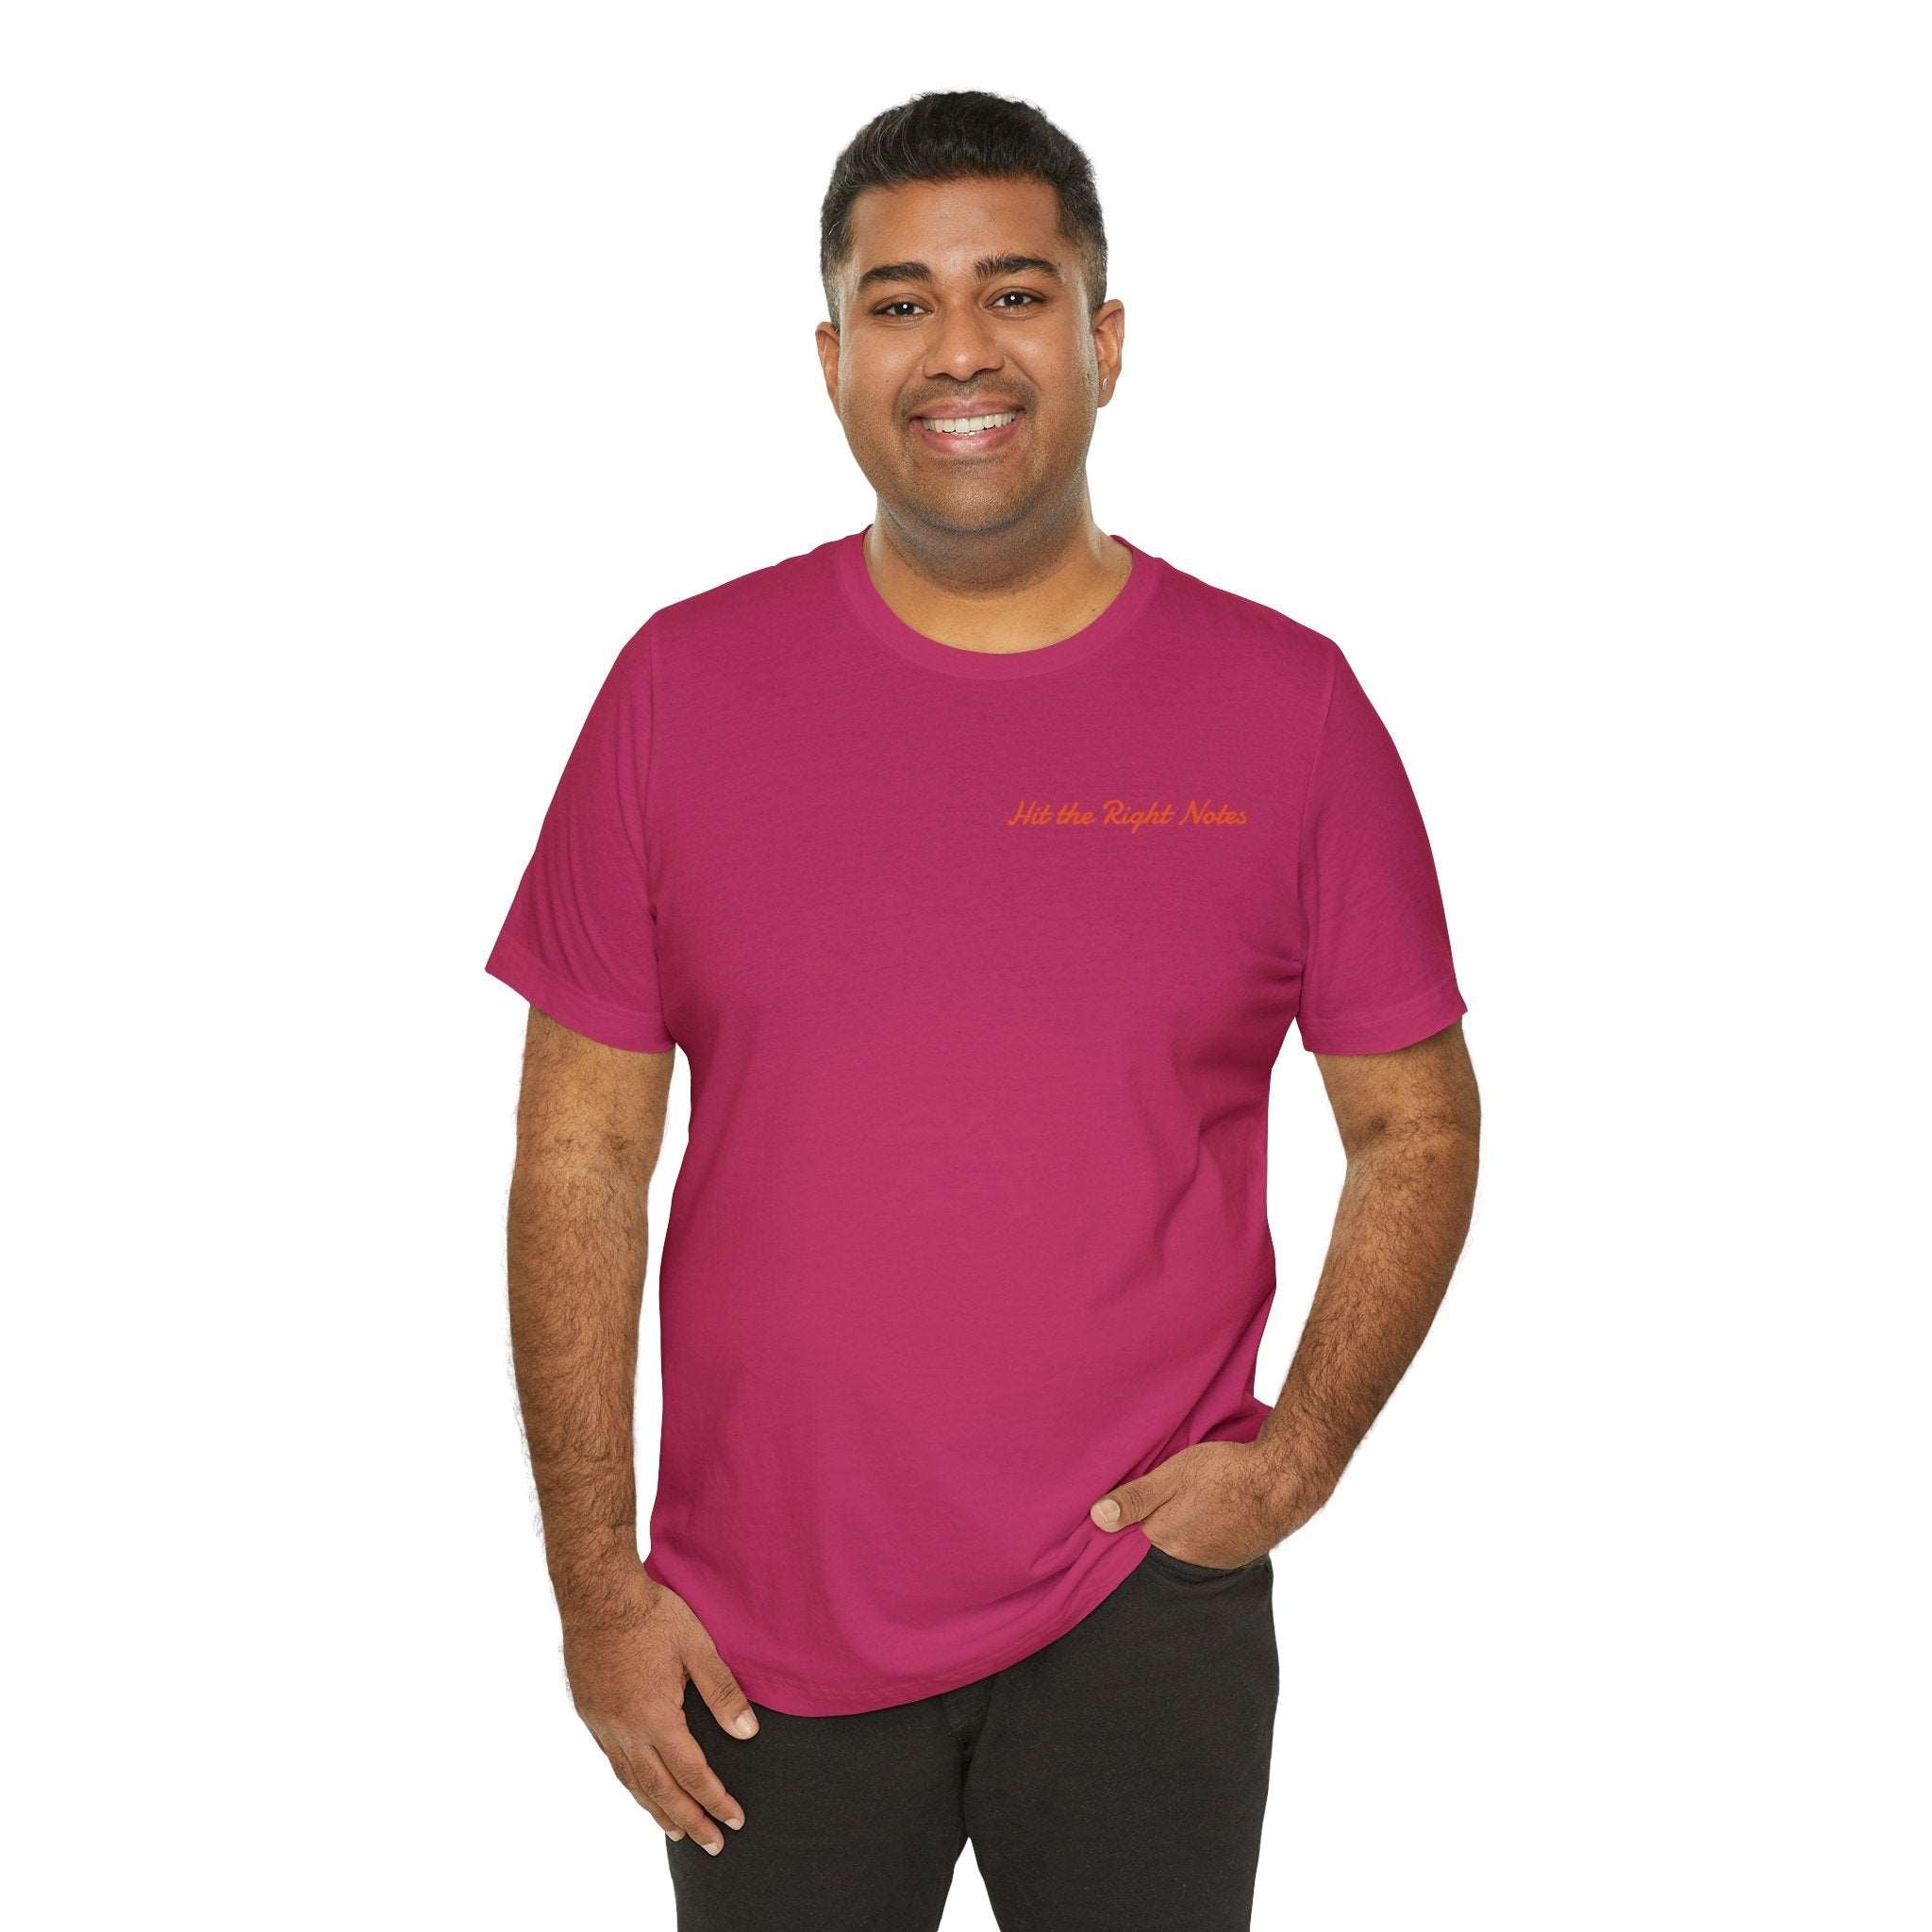 Hit the Right Notes Jersey Tee - Bella+Canvas 3001 Heather Mauve Classic Tee Comfortable Tee Cotton T-Shirt Graphic Tee JerseyTee Statement Shirt T-shirt Tee Unisex Apparel T-Shirt 3112947689782892565_2048_5dbf0b58-778c-454c-89e4-9360a5ebb346 Printify